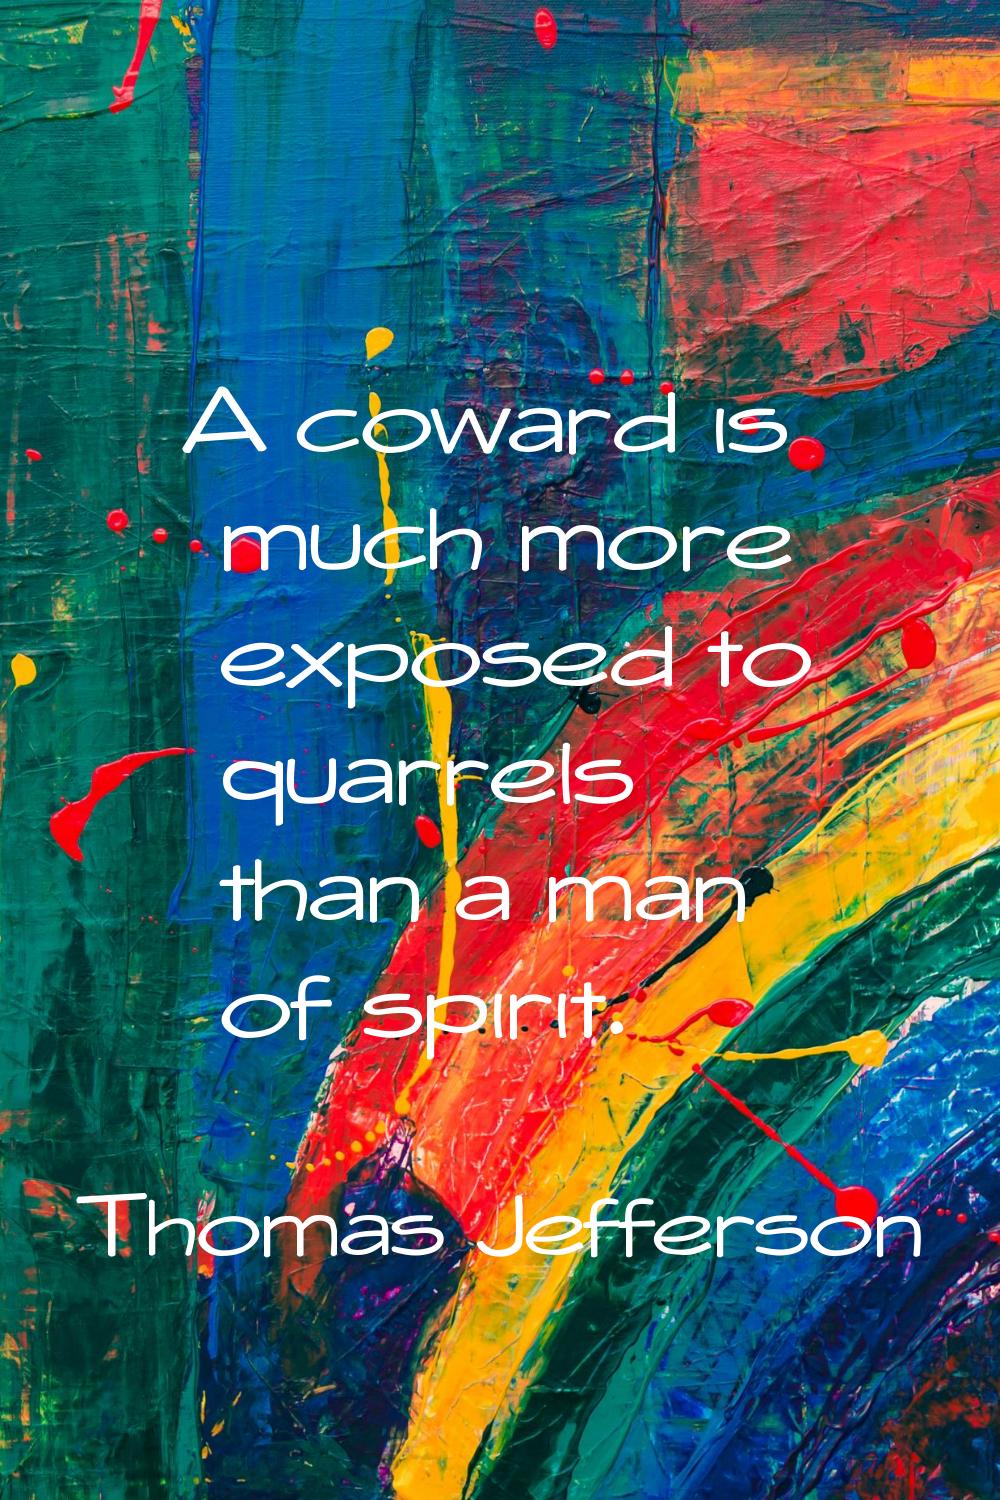 A coward is much more exposed to quarrels than a man of spirit.